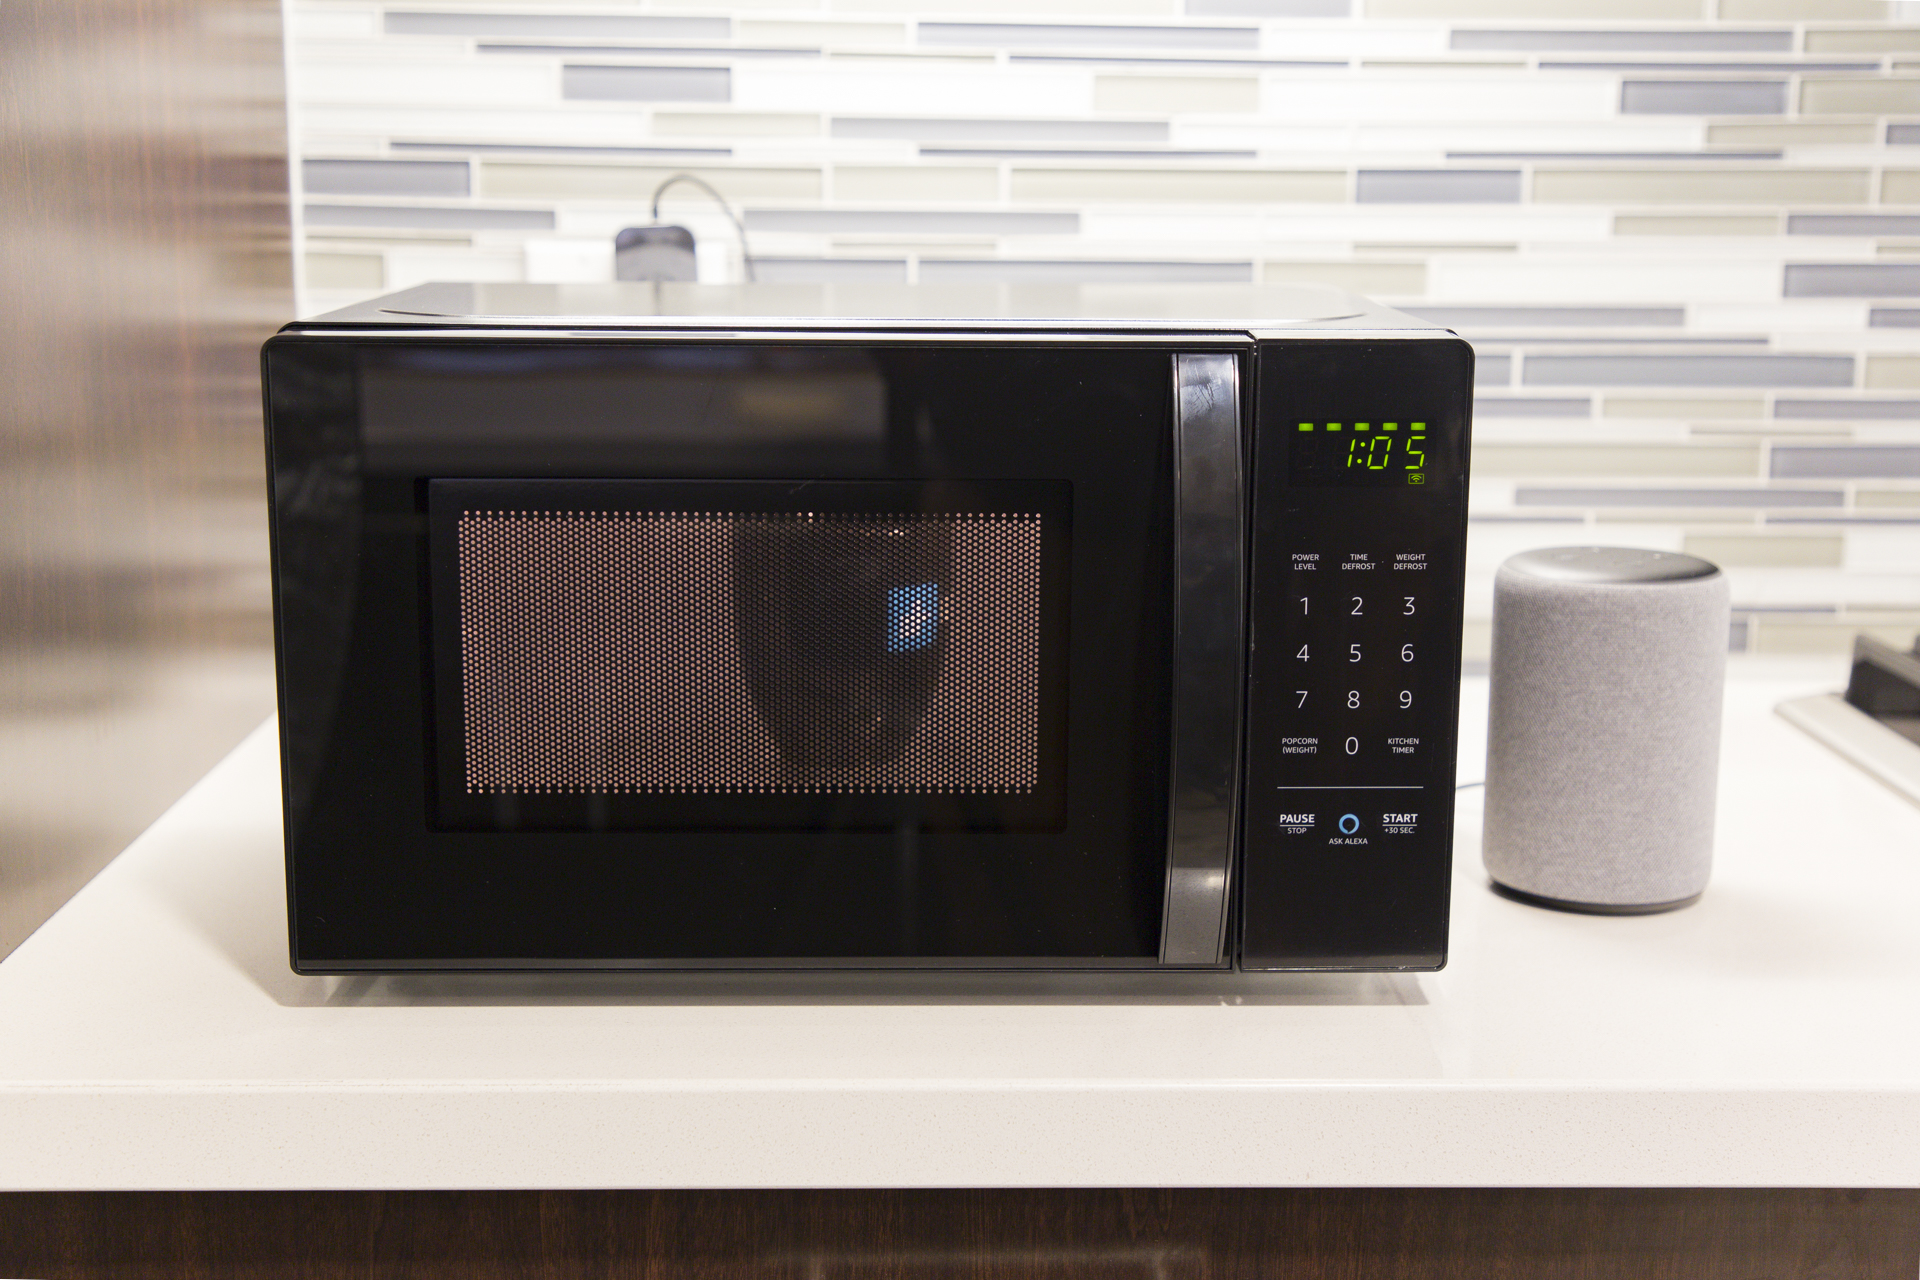 Basics Microwave review: Alexa makes you popcorn, orders more in this  compact, affordable microwave - CNET